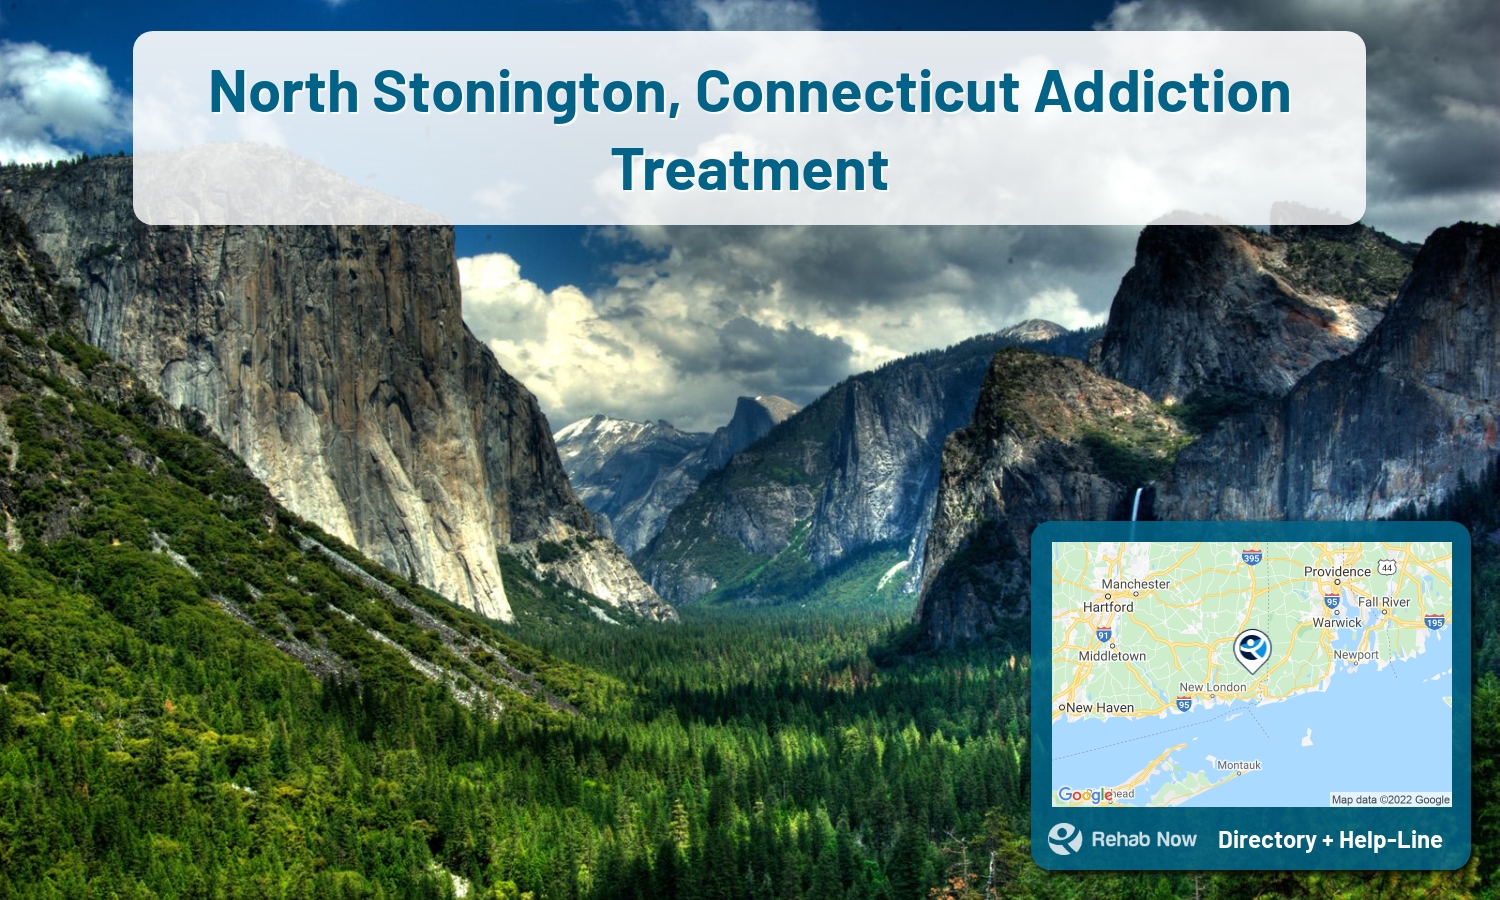 View options, availability, treatment methods, and more, for drug rehab and alcohol treatment in North Stonington, Connecticut